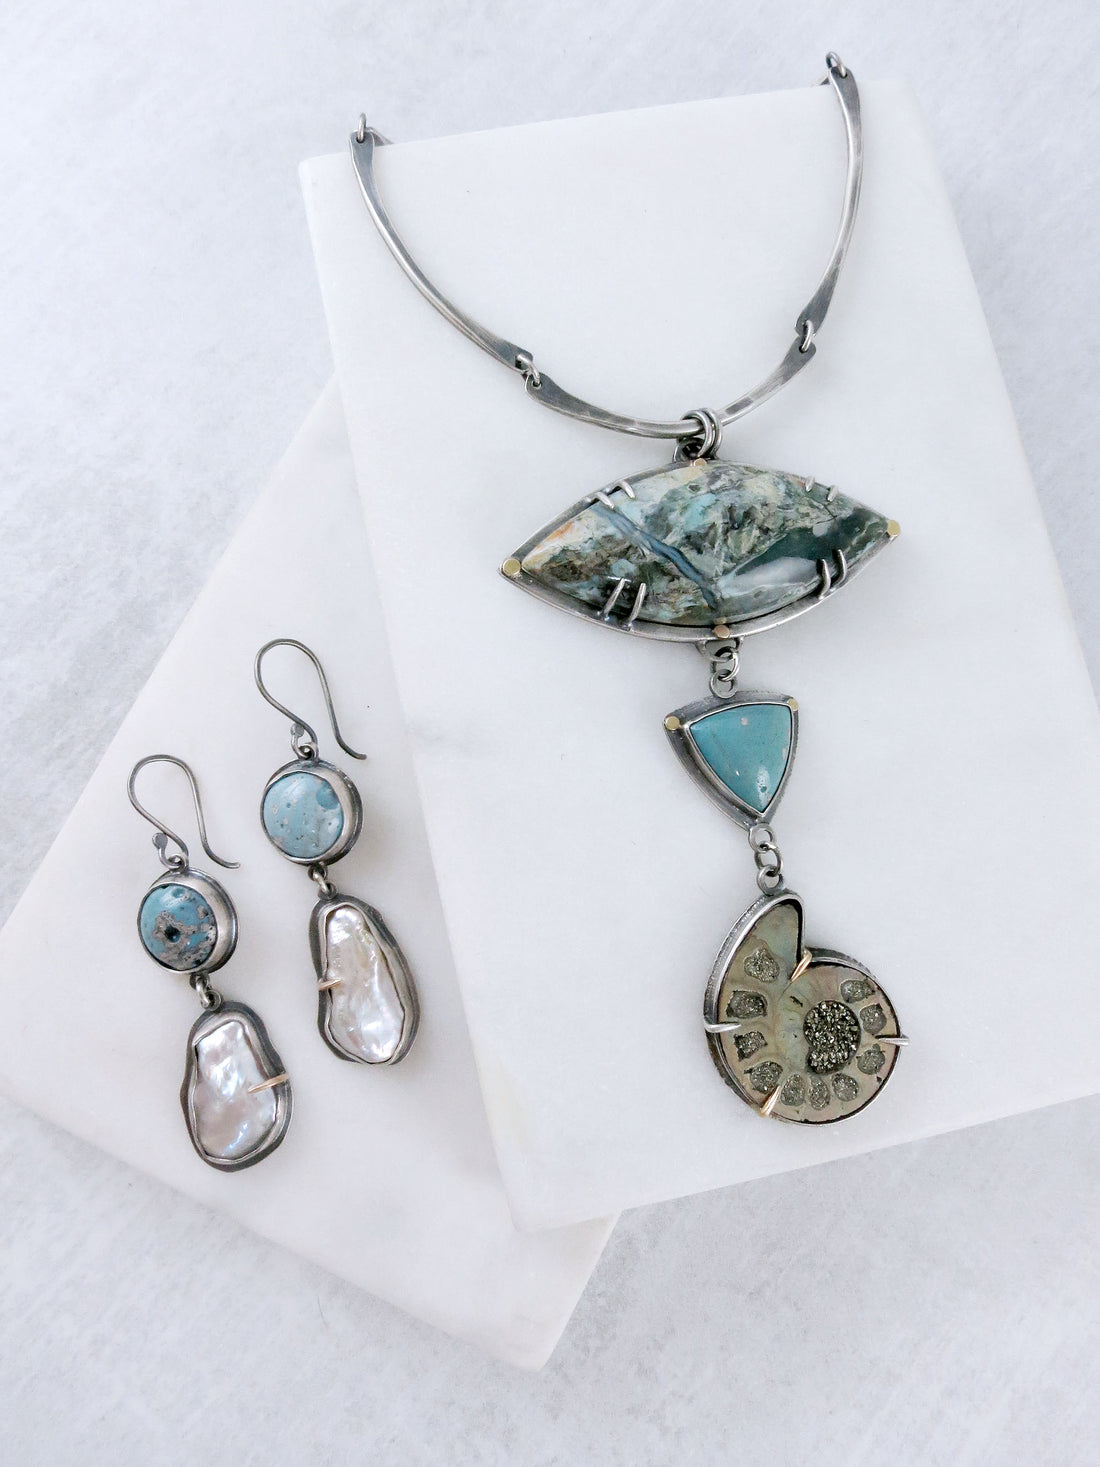 Rising From The Sea Necklace and Earrings - Jewelry Fit For Mermaids!